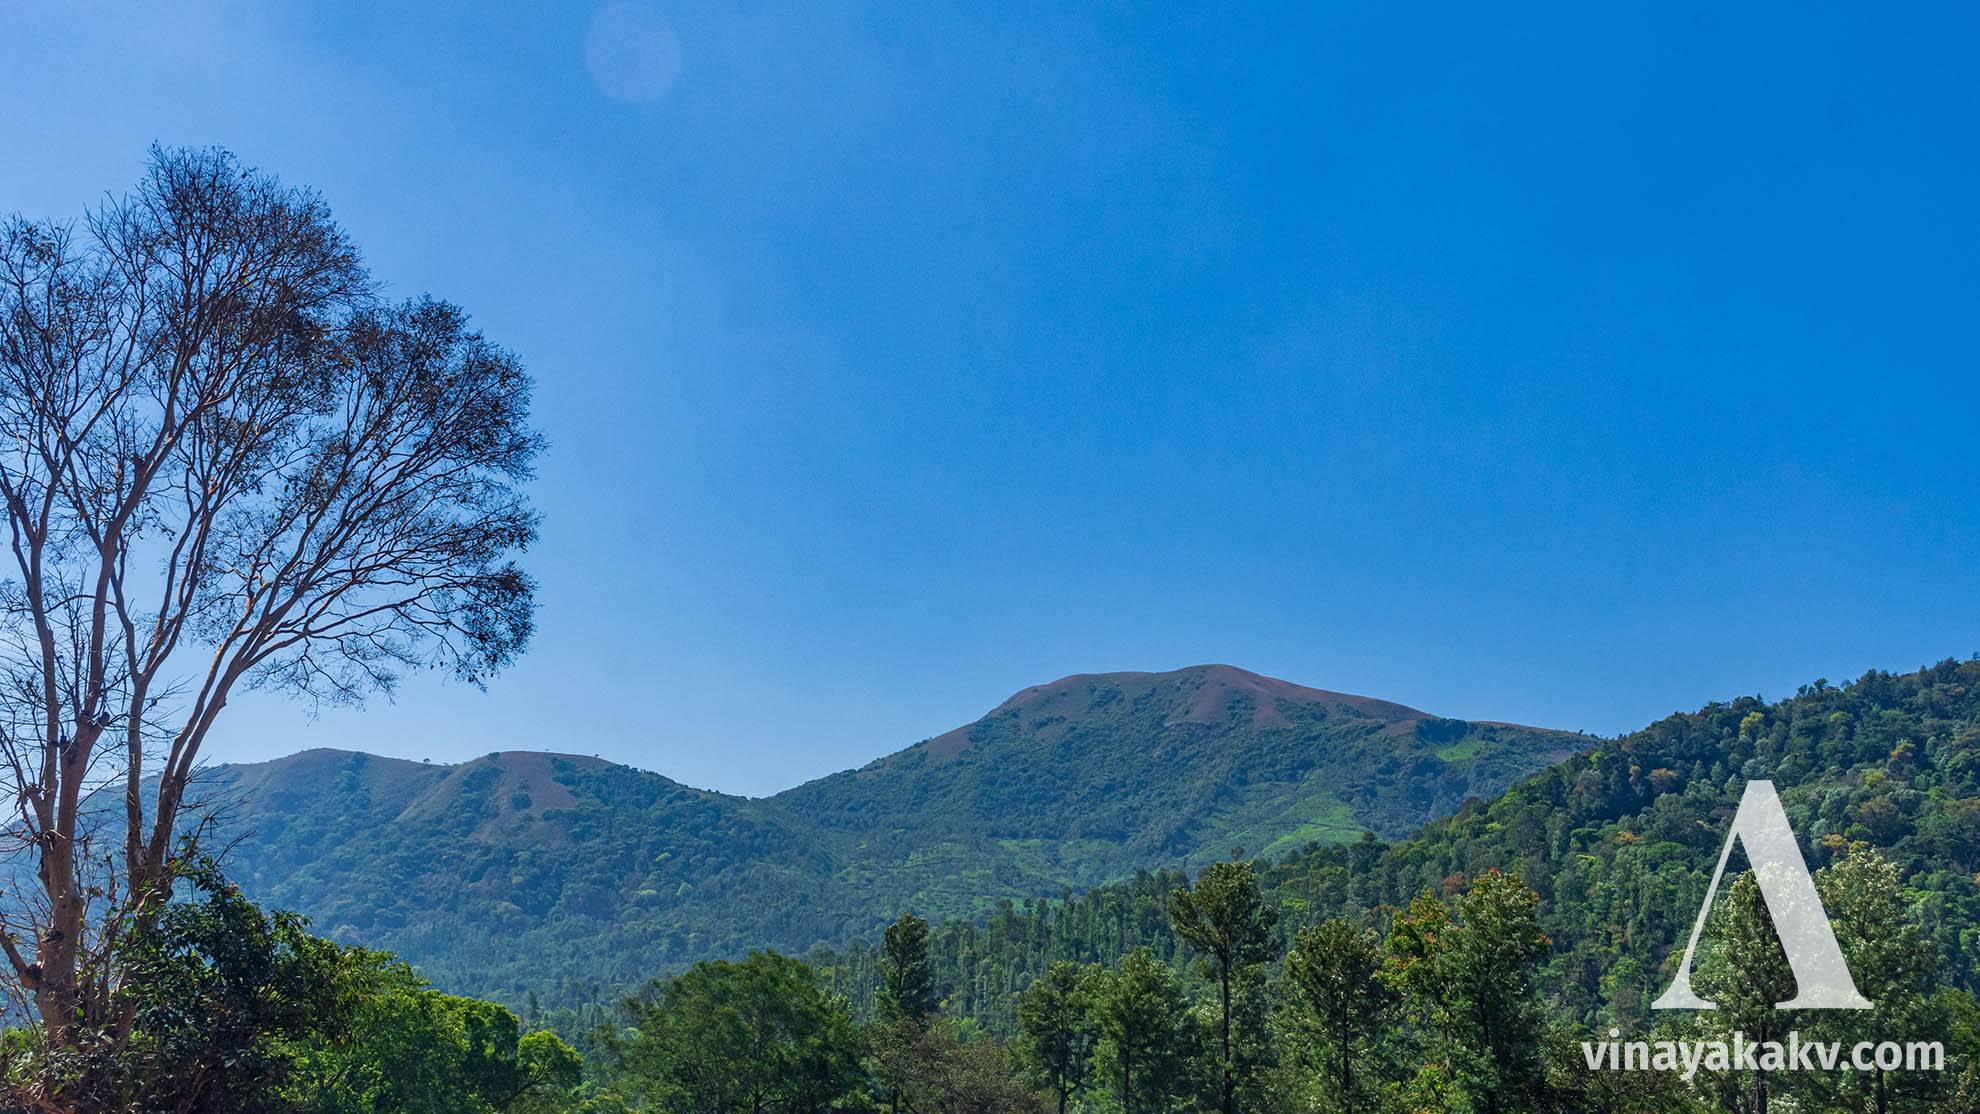 In the last layer, there is a mountain belonging to the bordering Western Ghats with a Tea plantation at the right and center, grassland on top, and native forest at the left. The mountain in the next layer is covered with a Coffee plantation.